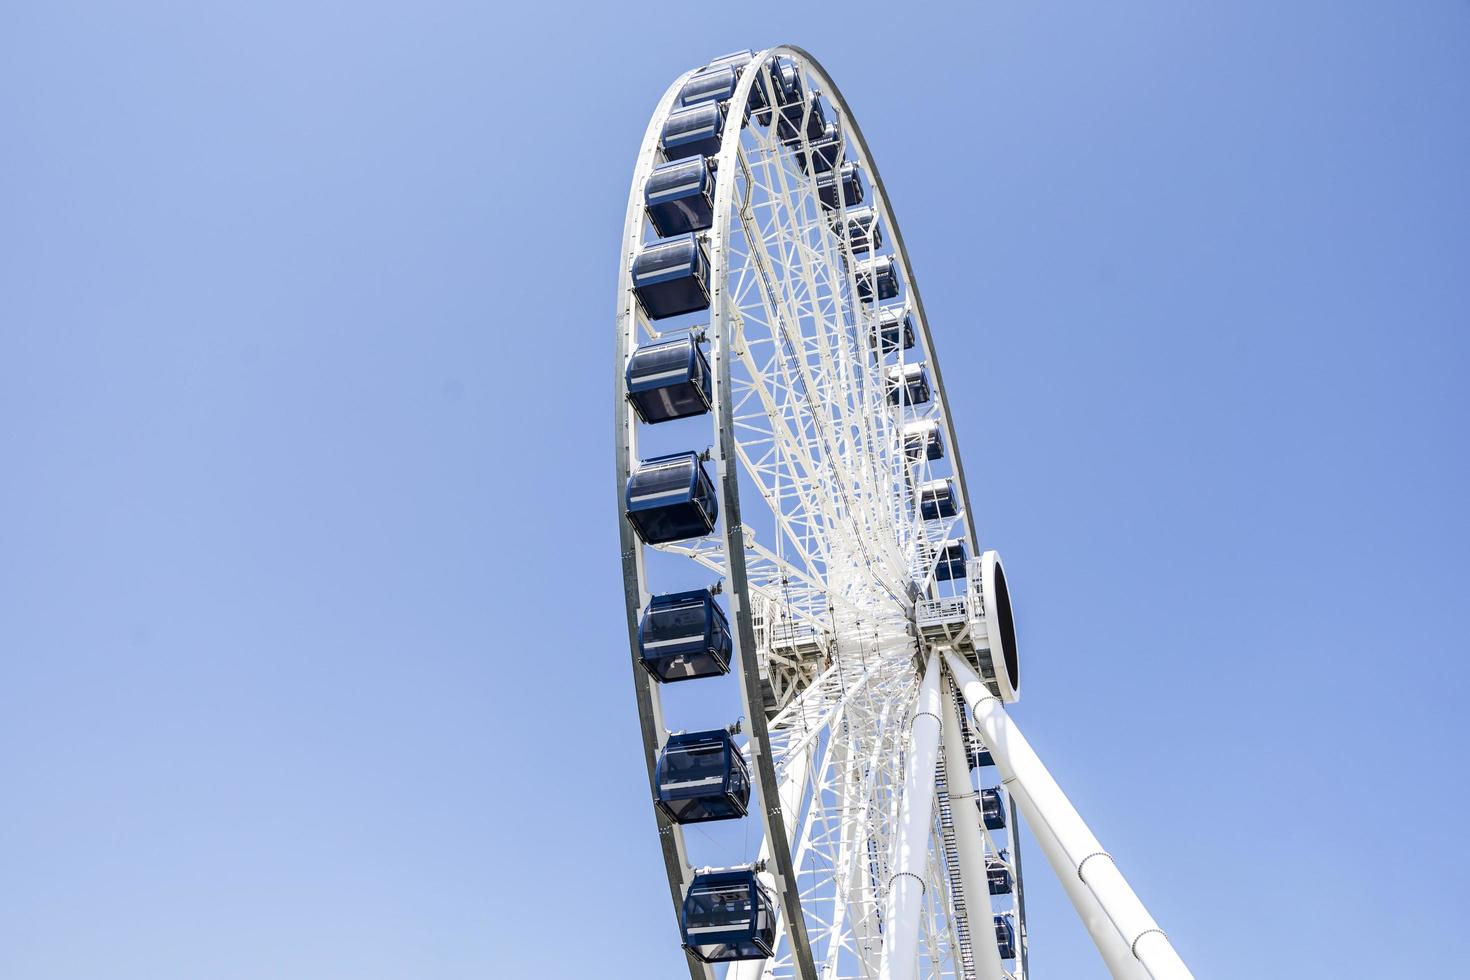 White and Black Ferris wheel in from of blue sky with clouds photo